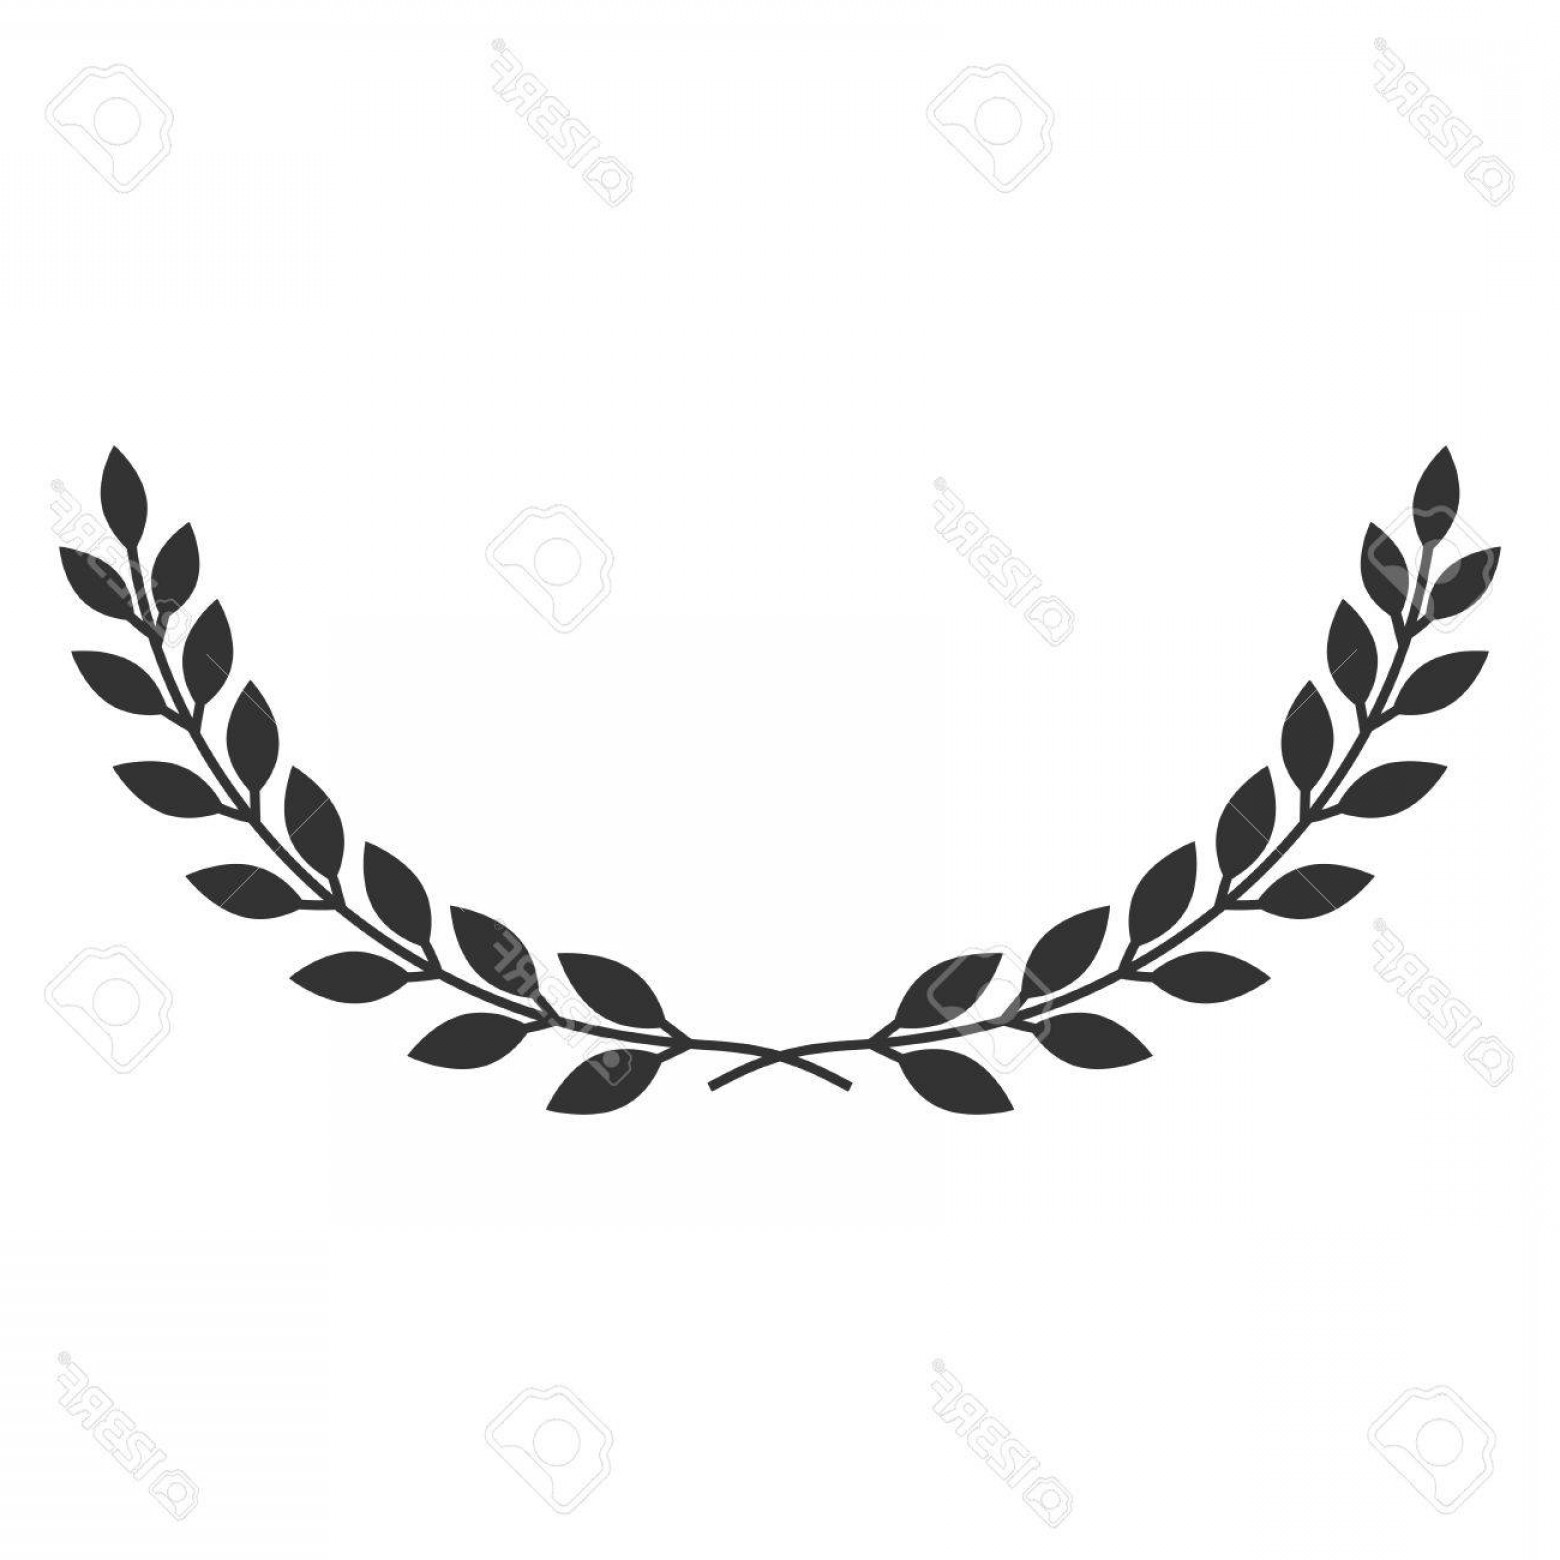 Download Laurel Wreath Icon at Vectorified.com | Collection of ...